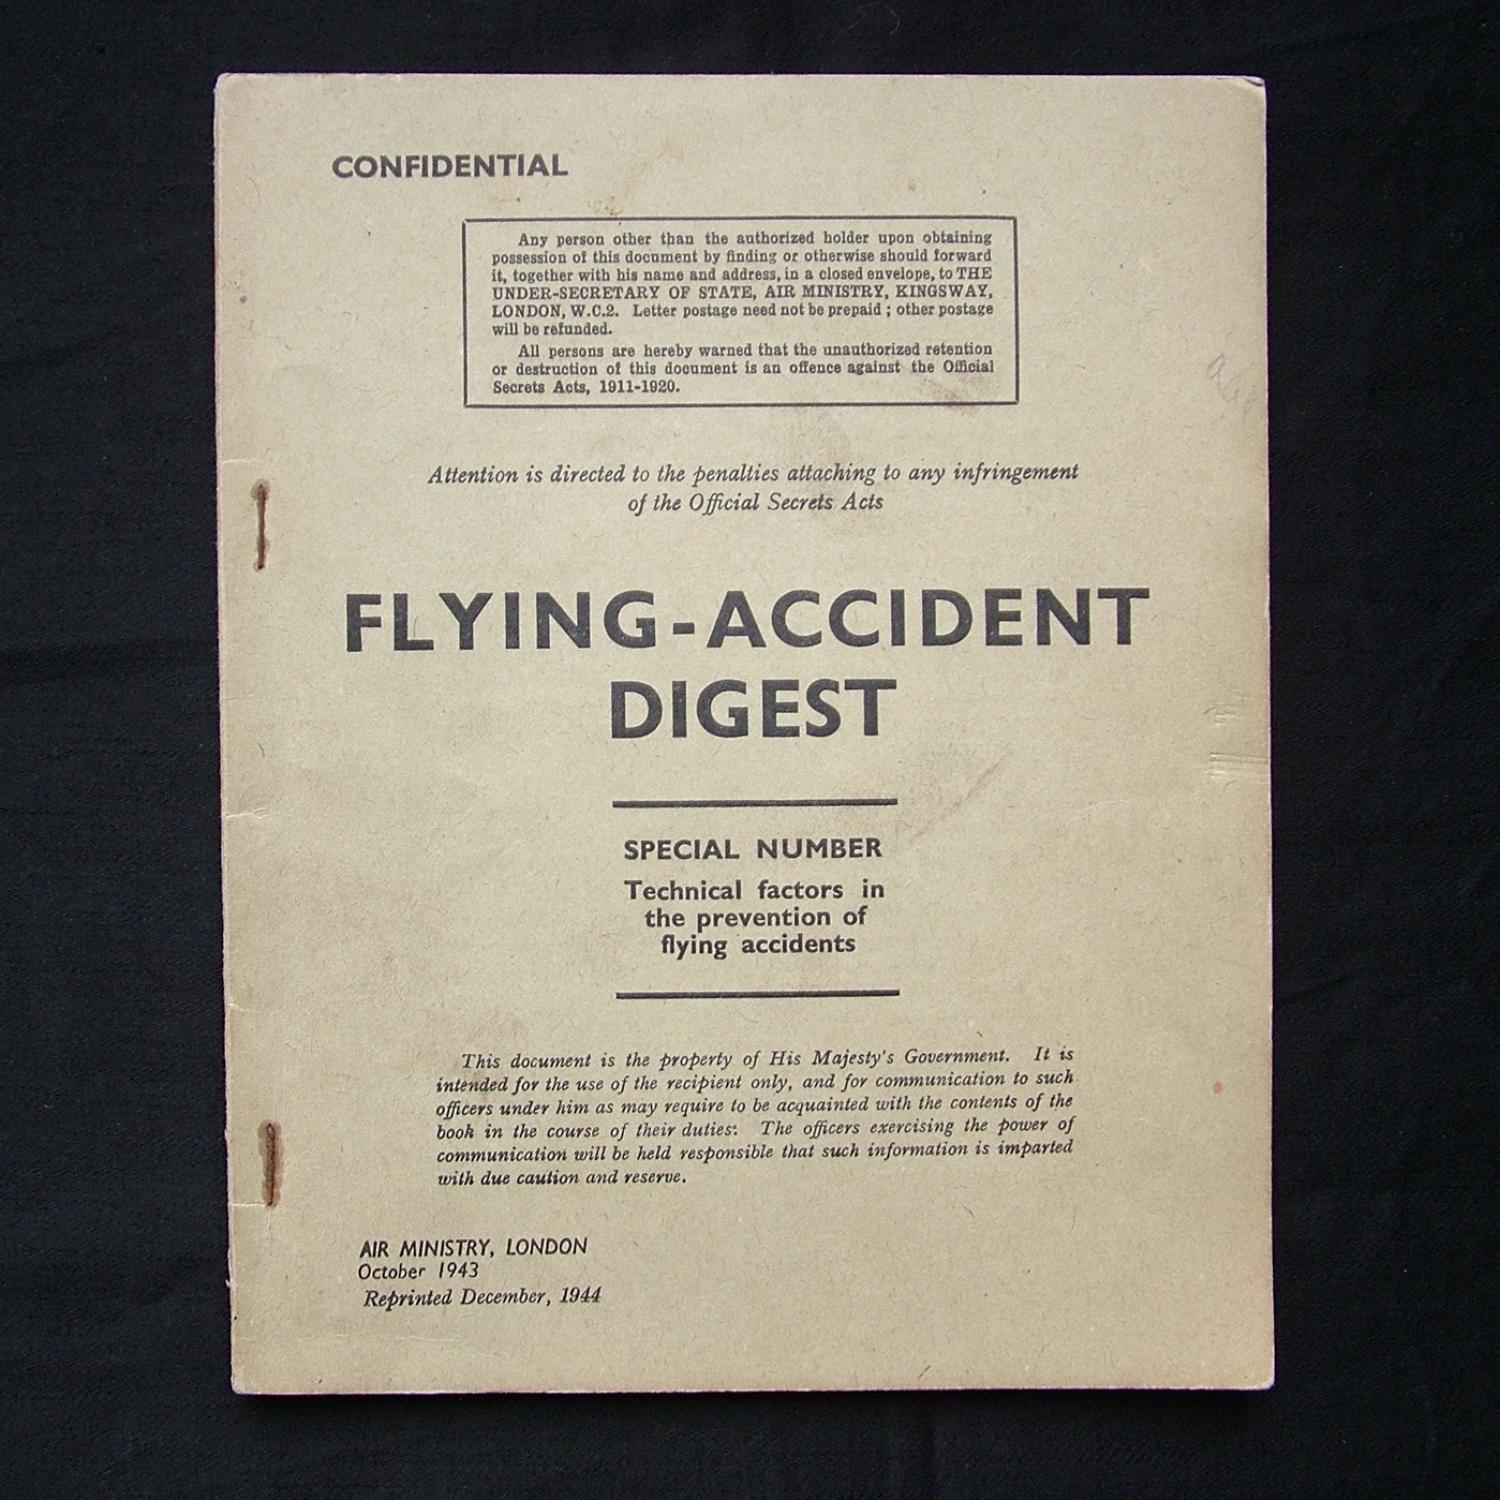 Air Ministry flying accident digest